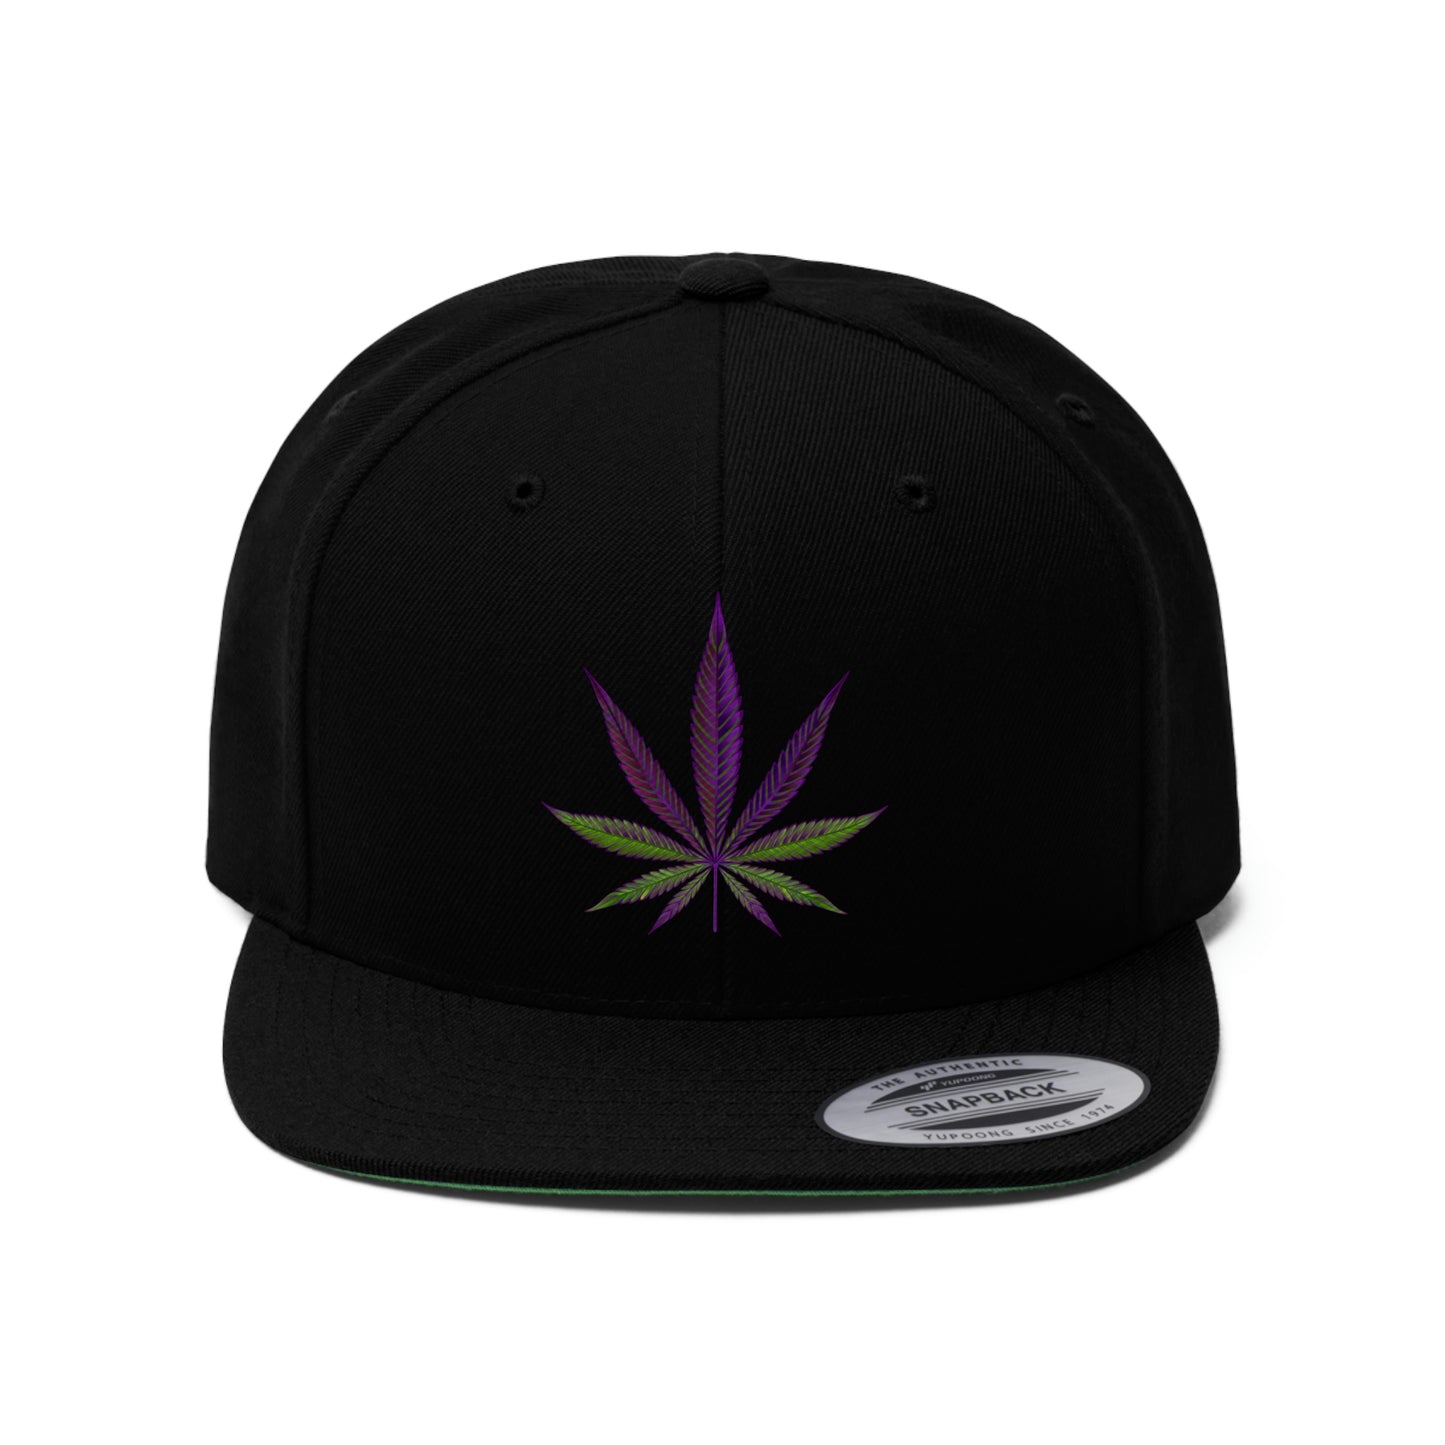 Close up of the all black Purple Marijuana Leaf Snapback hat with a multi colored leaf in the center